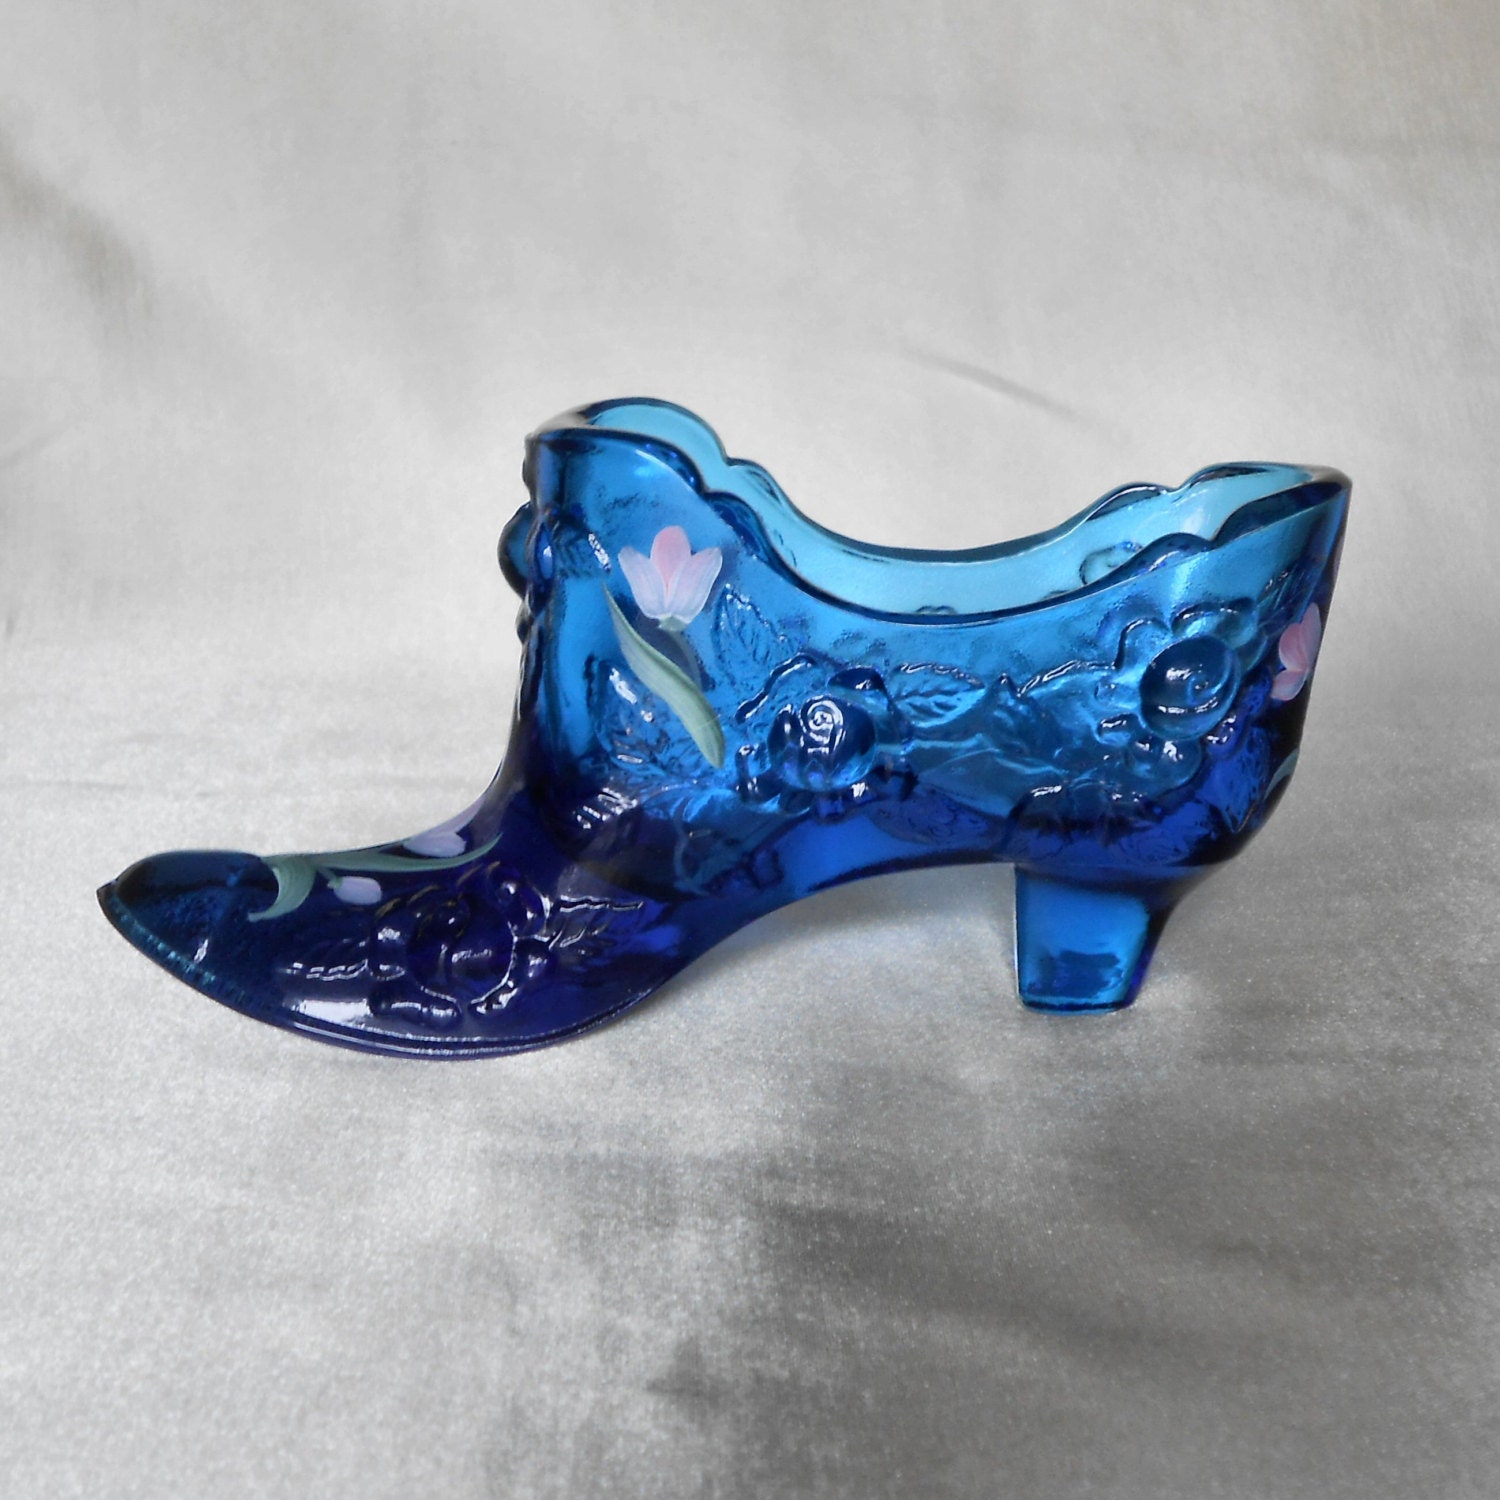 Fenton Blue Glass Shoe with Coraline by KenFrankCollectibles